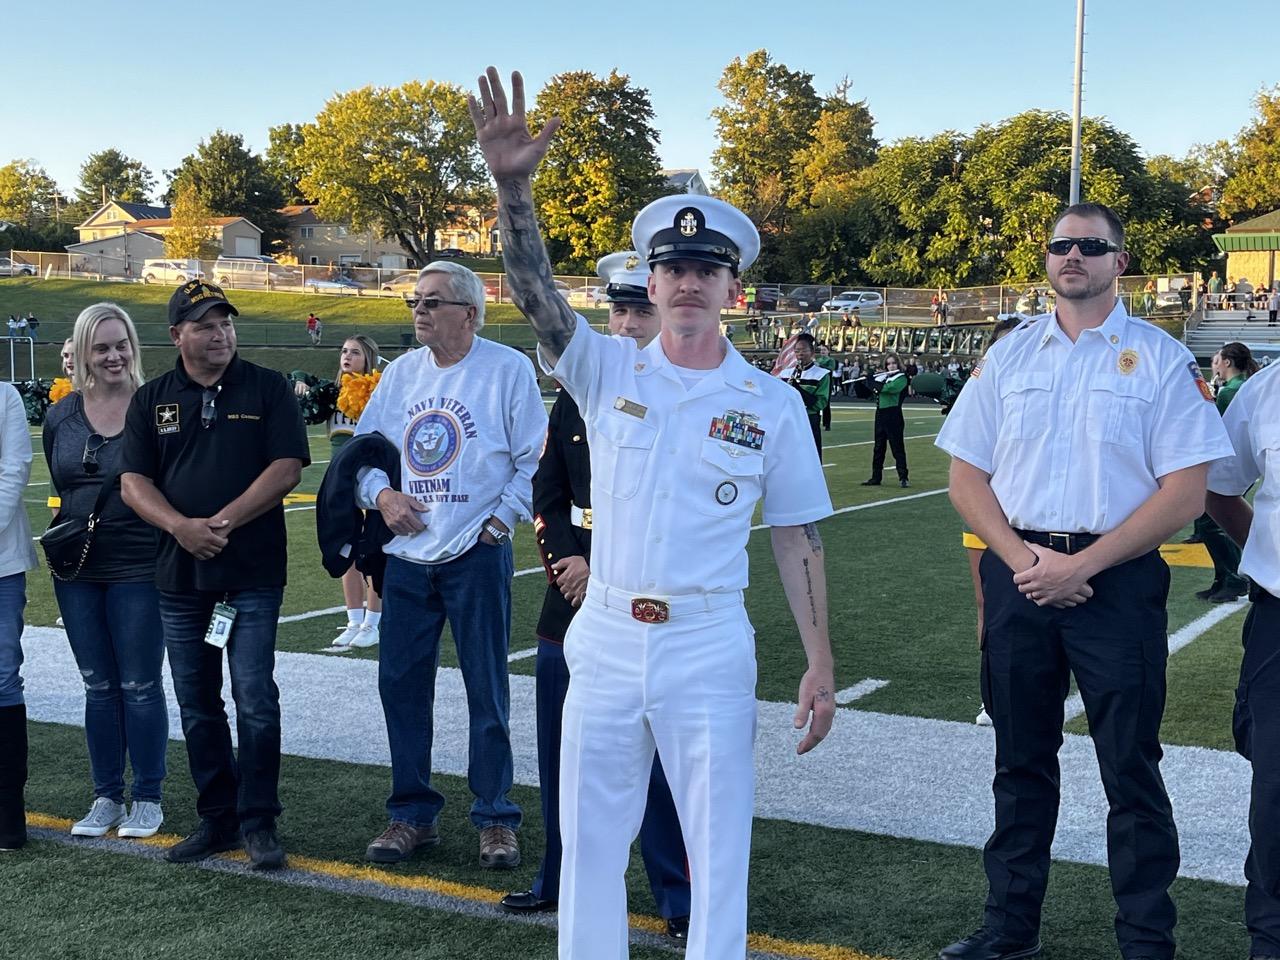 MMC(SW/AW) Adam Veitch stepped forward during the playing of the U.S. Navy anthem, ‘Anchors Aweigh’